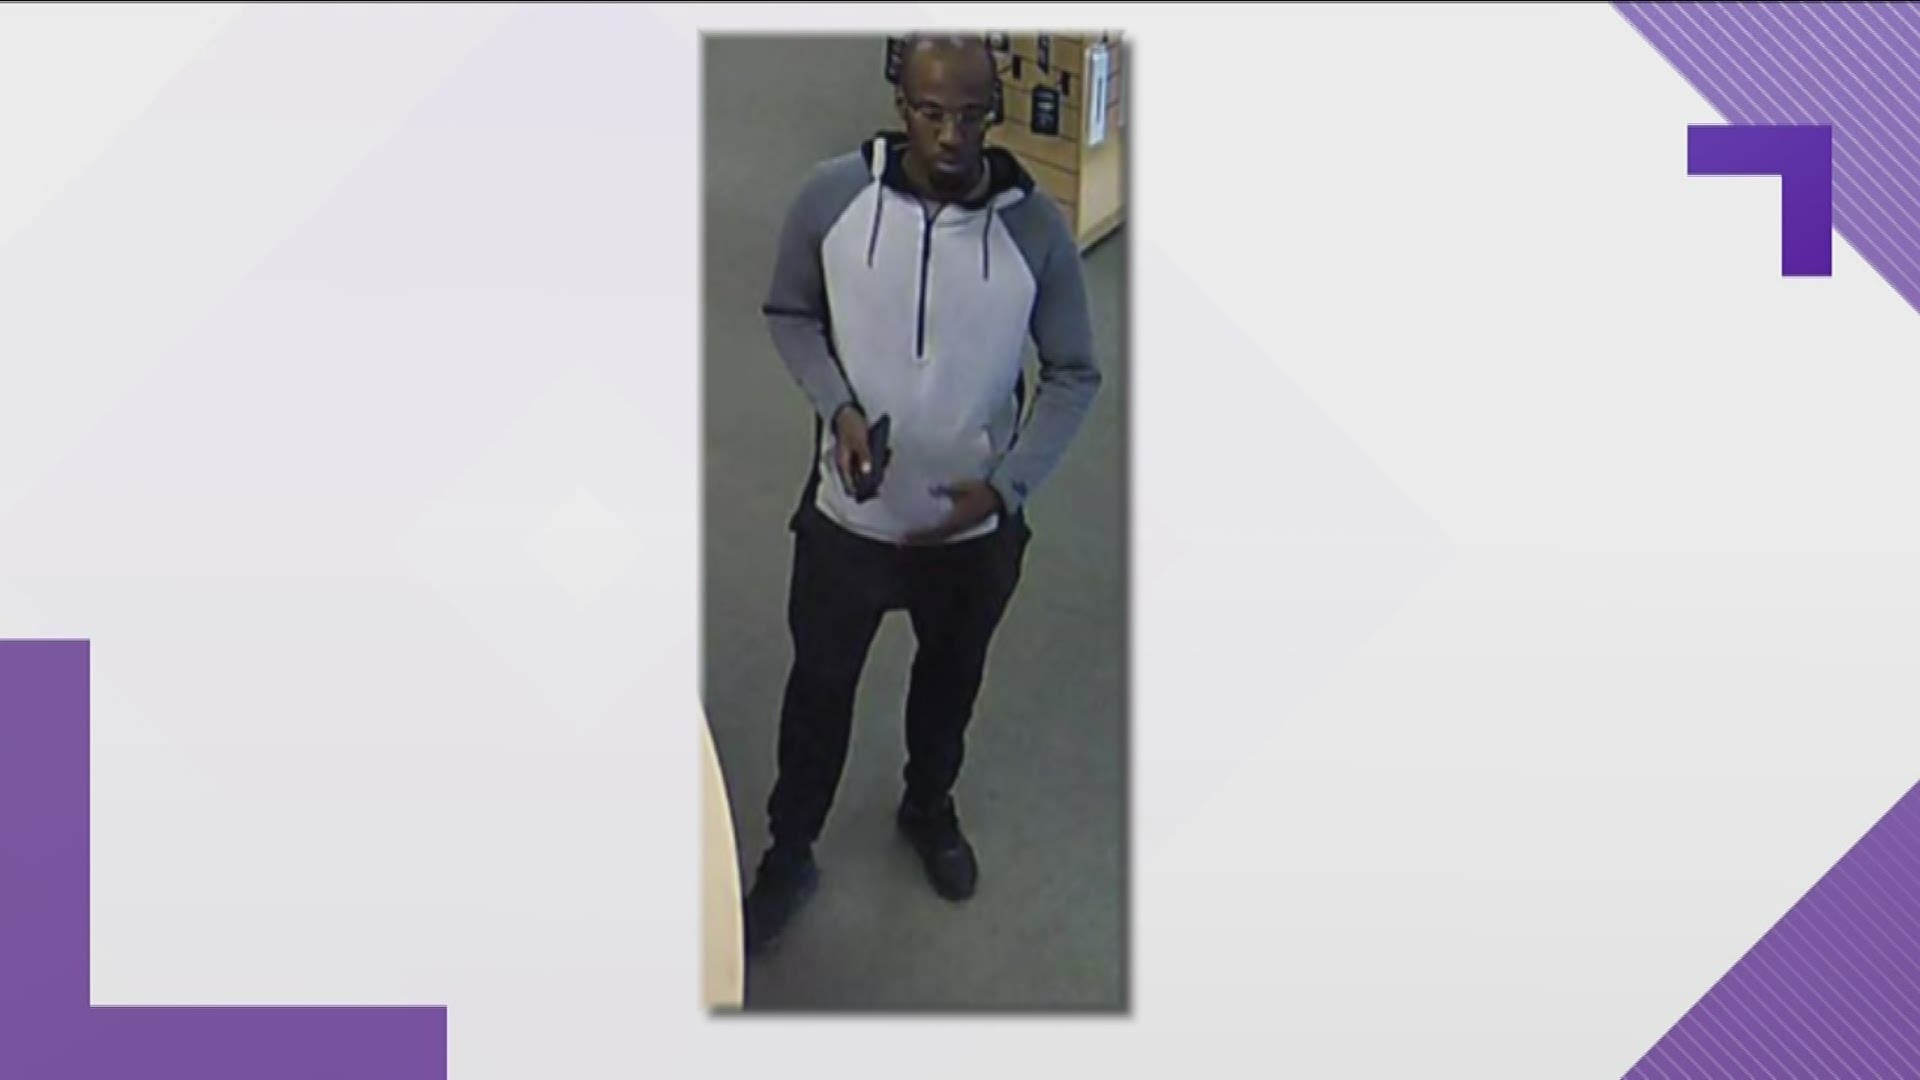 The suspect put the computer inside his pants and walked out of a store in Peachtree Conyers. If you recognize him, call Gwinnett County Police.